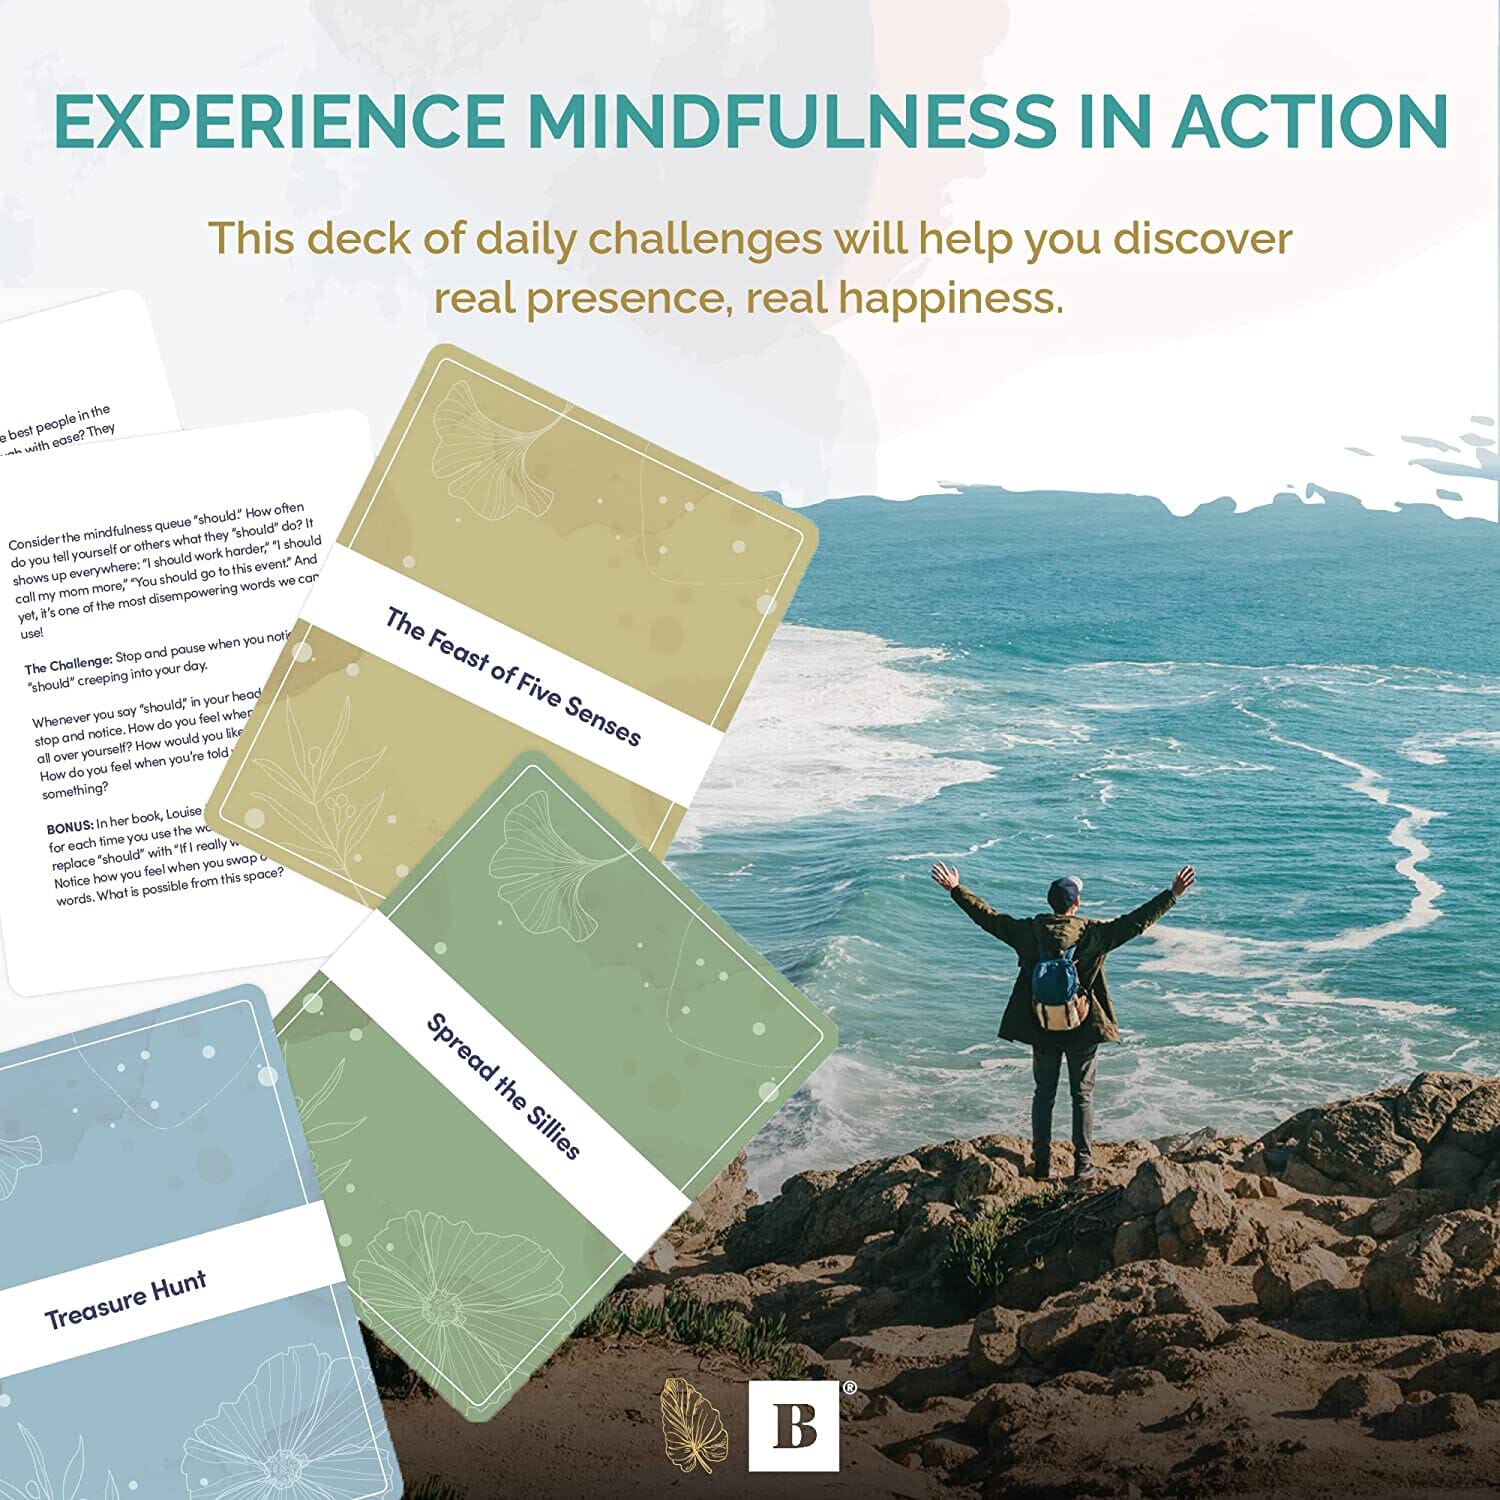 Mindful Moments Deck - The Ohm Store Card Deck Personal Growth